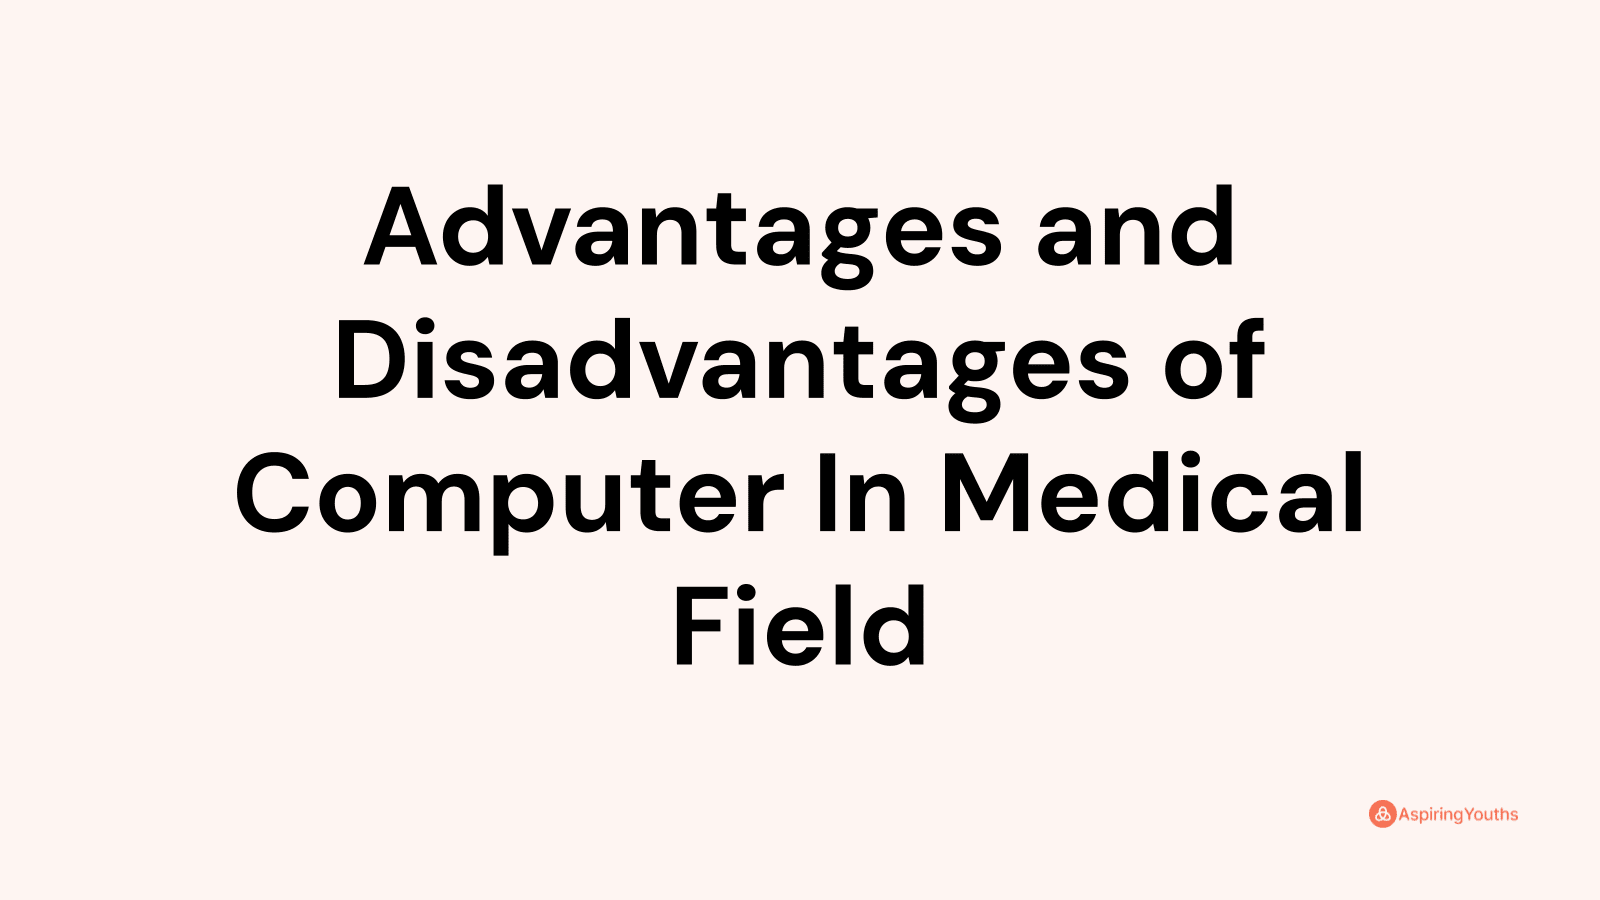 Advantages and disadvantages of Computer In Medical Field